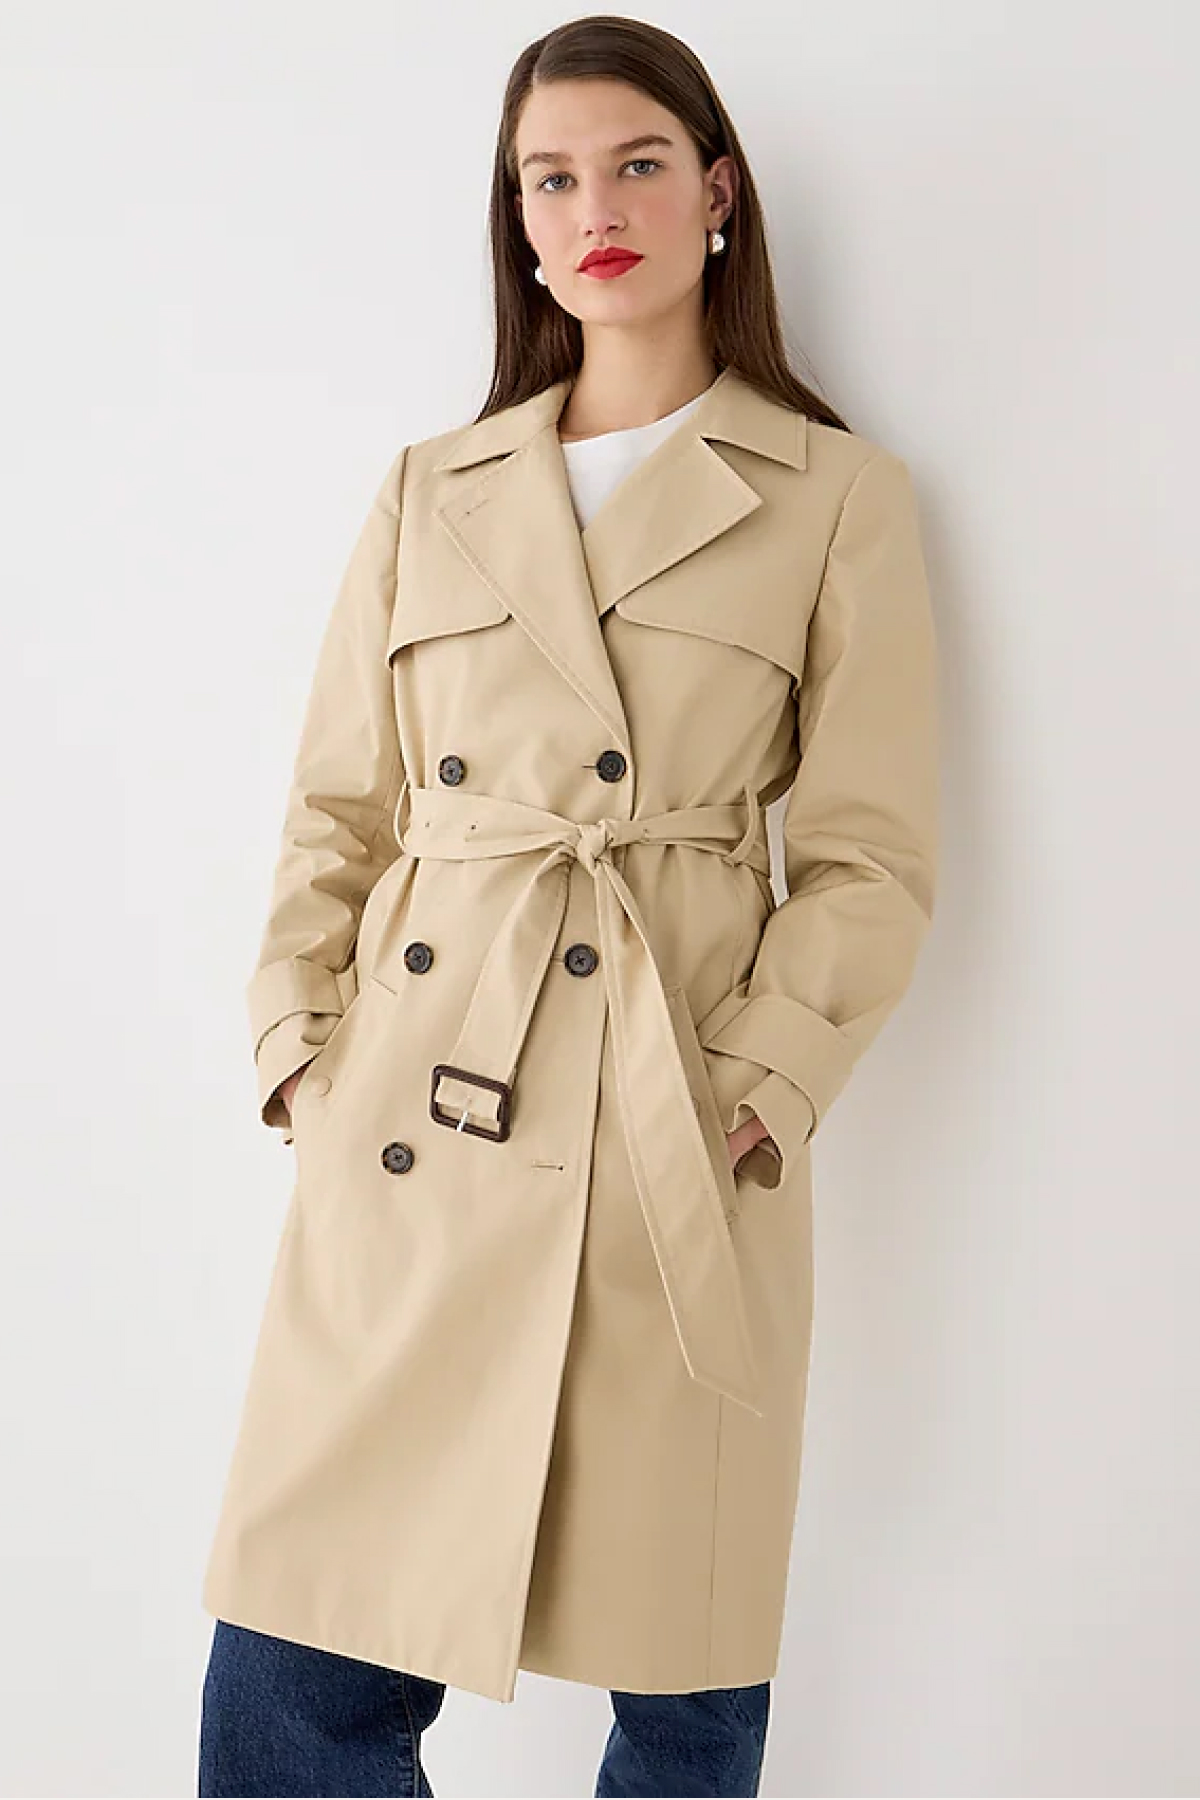 Ladies Belted Double Breasted Outwear Trench Coat Ol Overcoat Blend Jackets  Coat